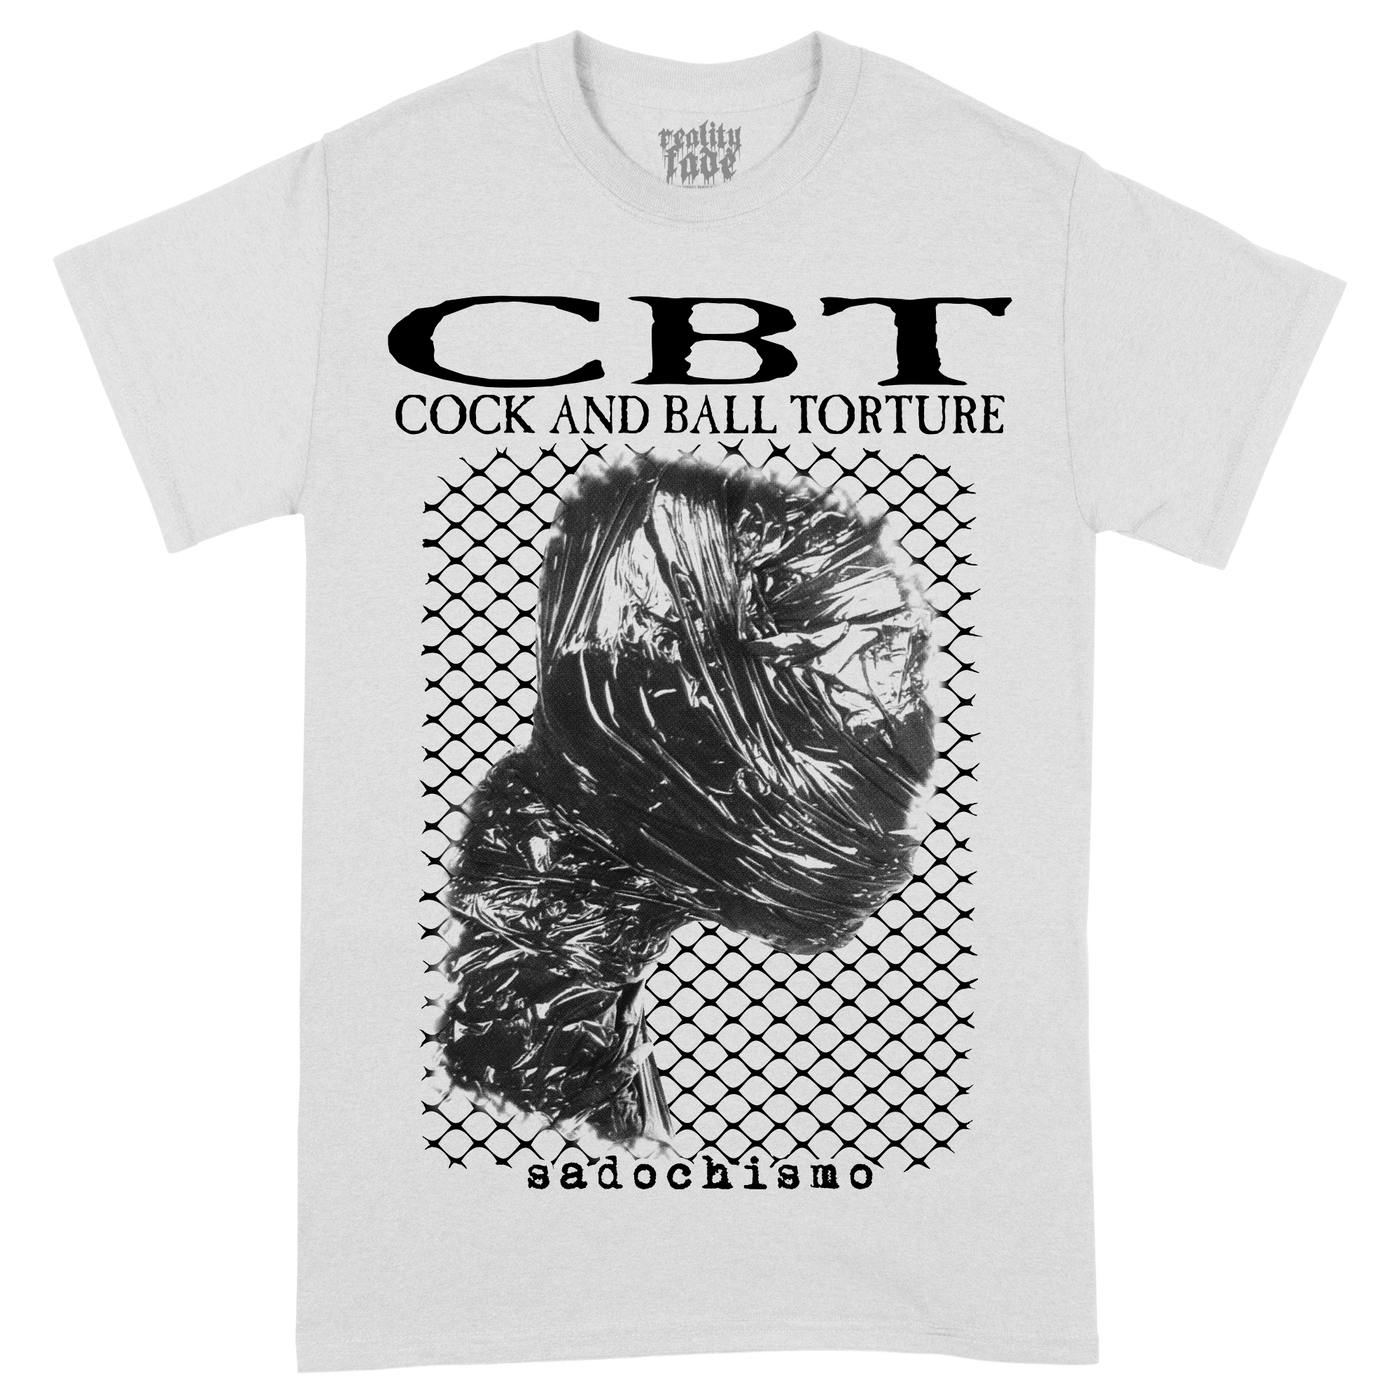 Cock And Ball Torture 'Sadochismo' T-Shirt